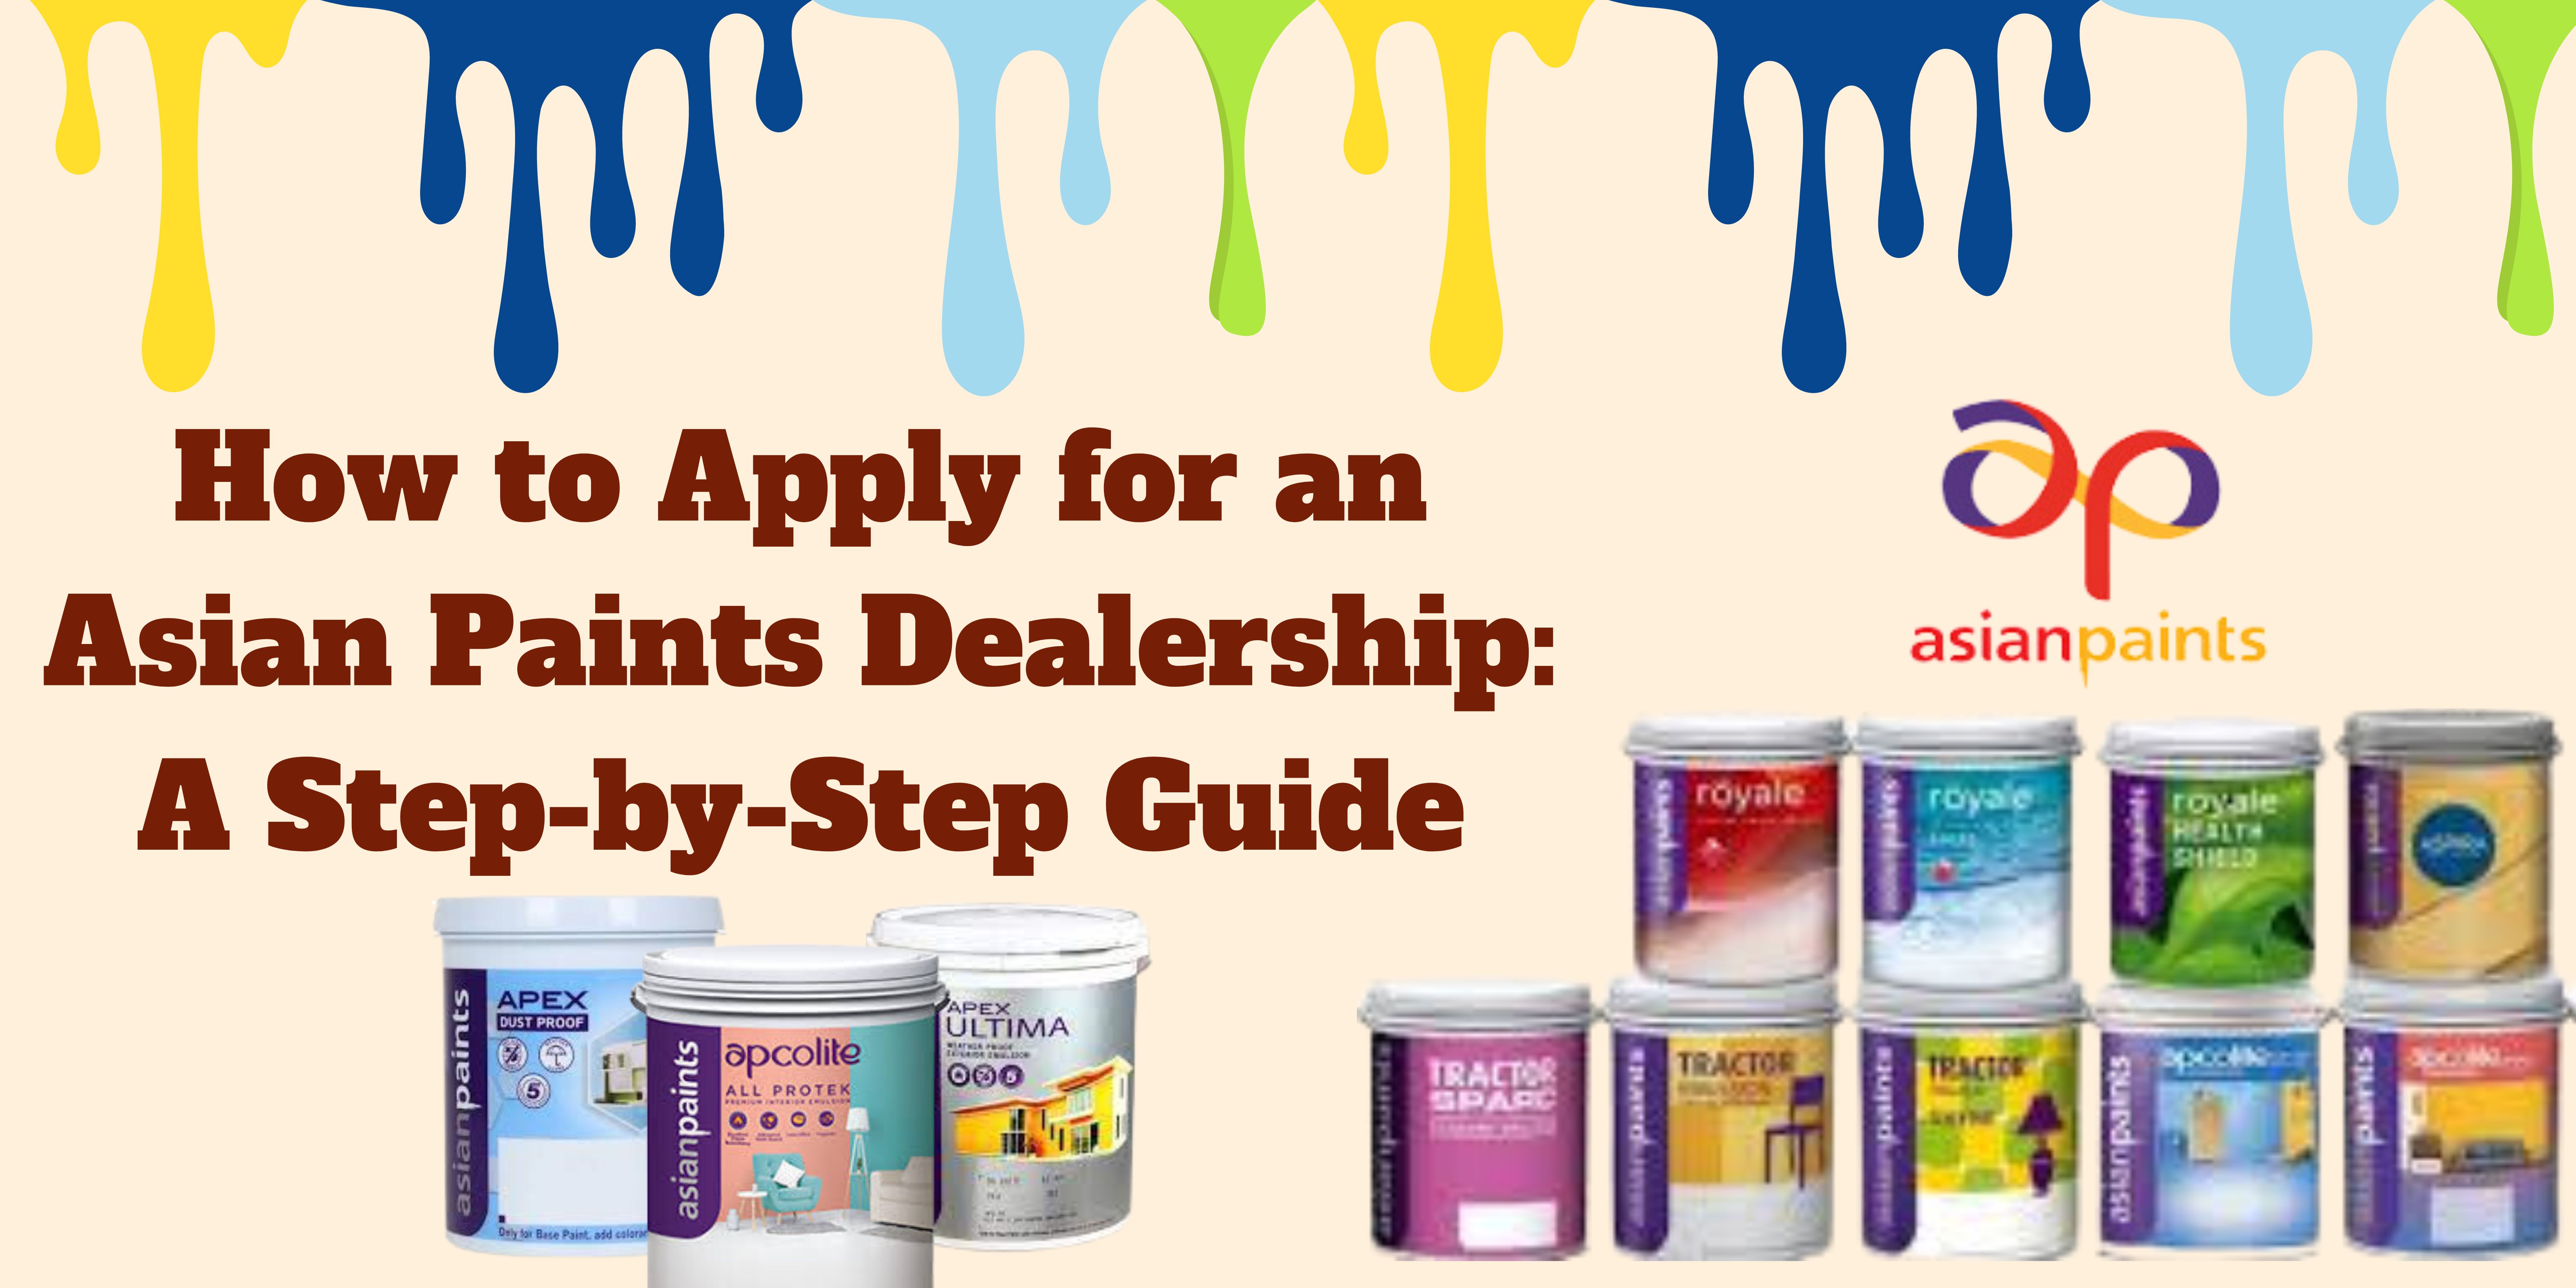 How to Apply for an Asian Paints Dealership: A Step-by-Step Guide